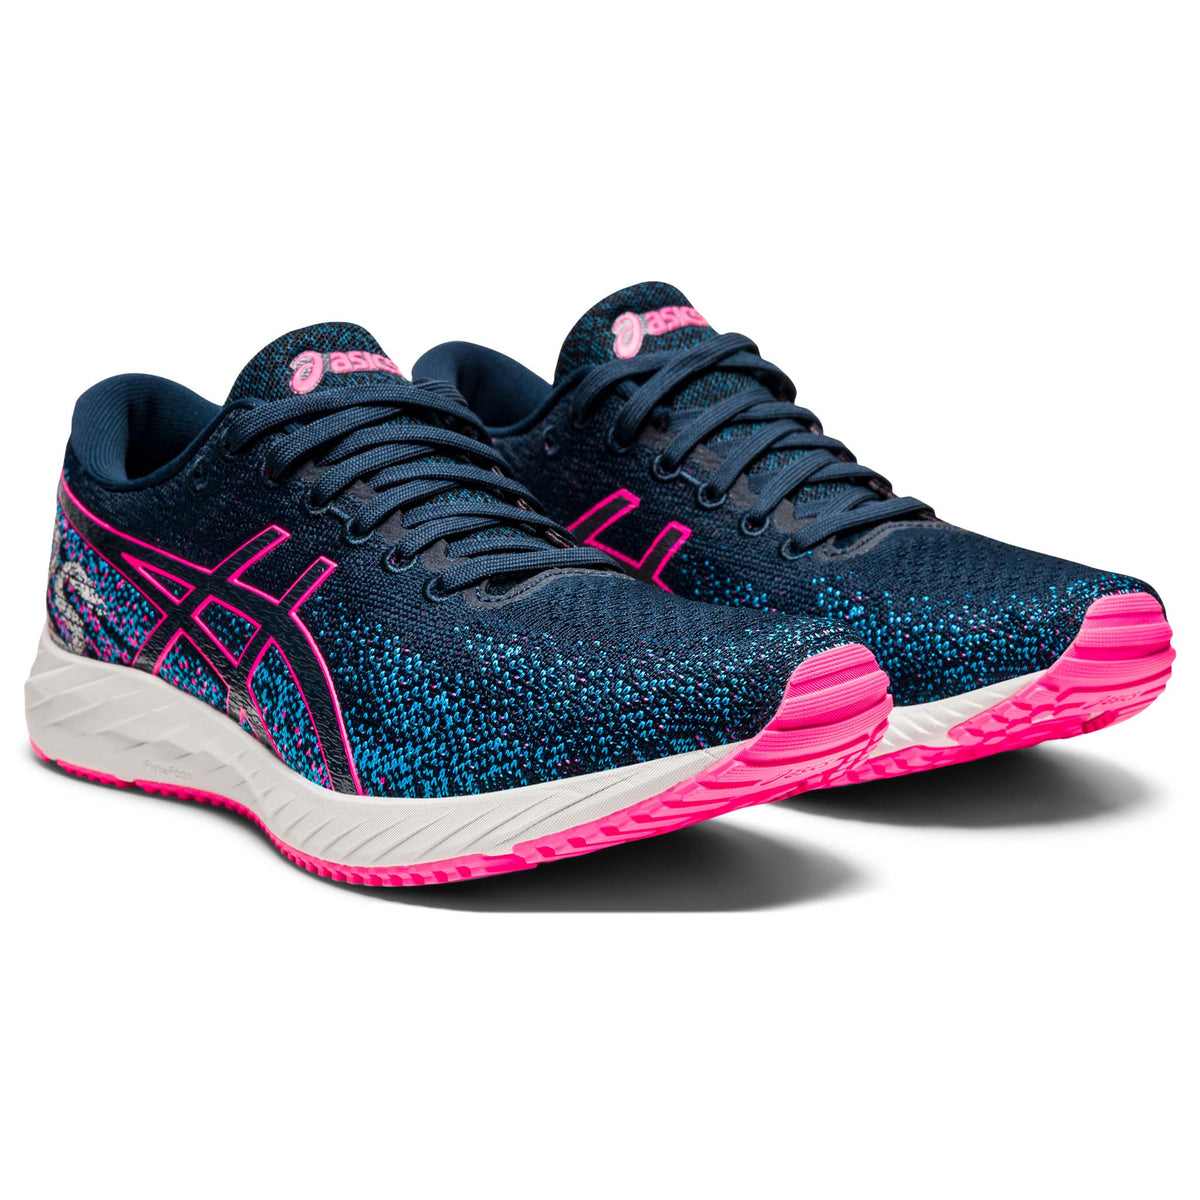 Asics Gel-DS Trainer 26 running femme french blue hot pink paire